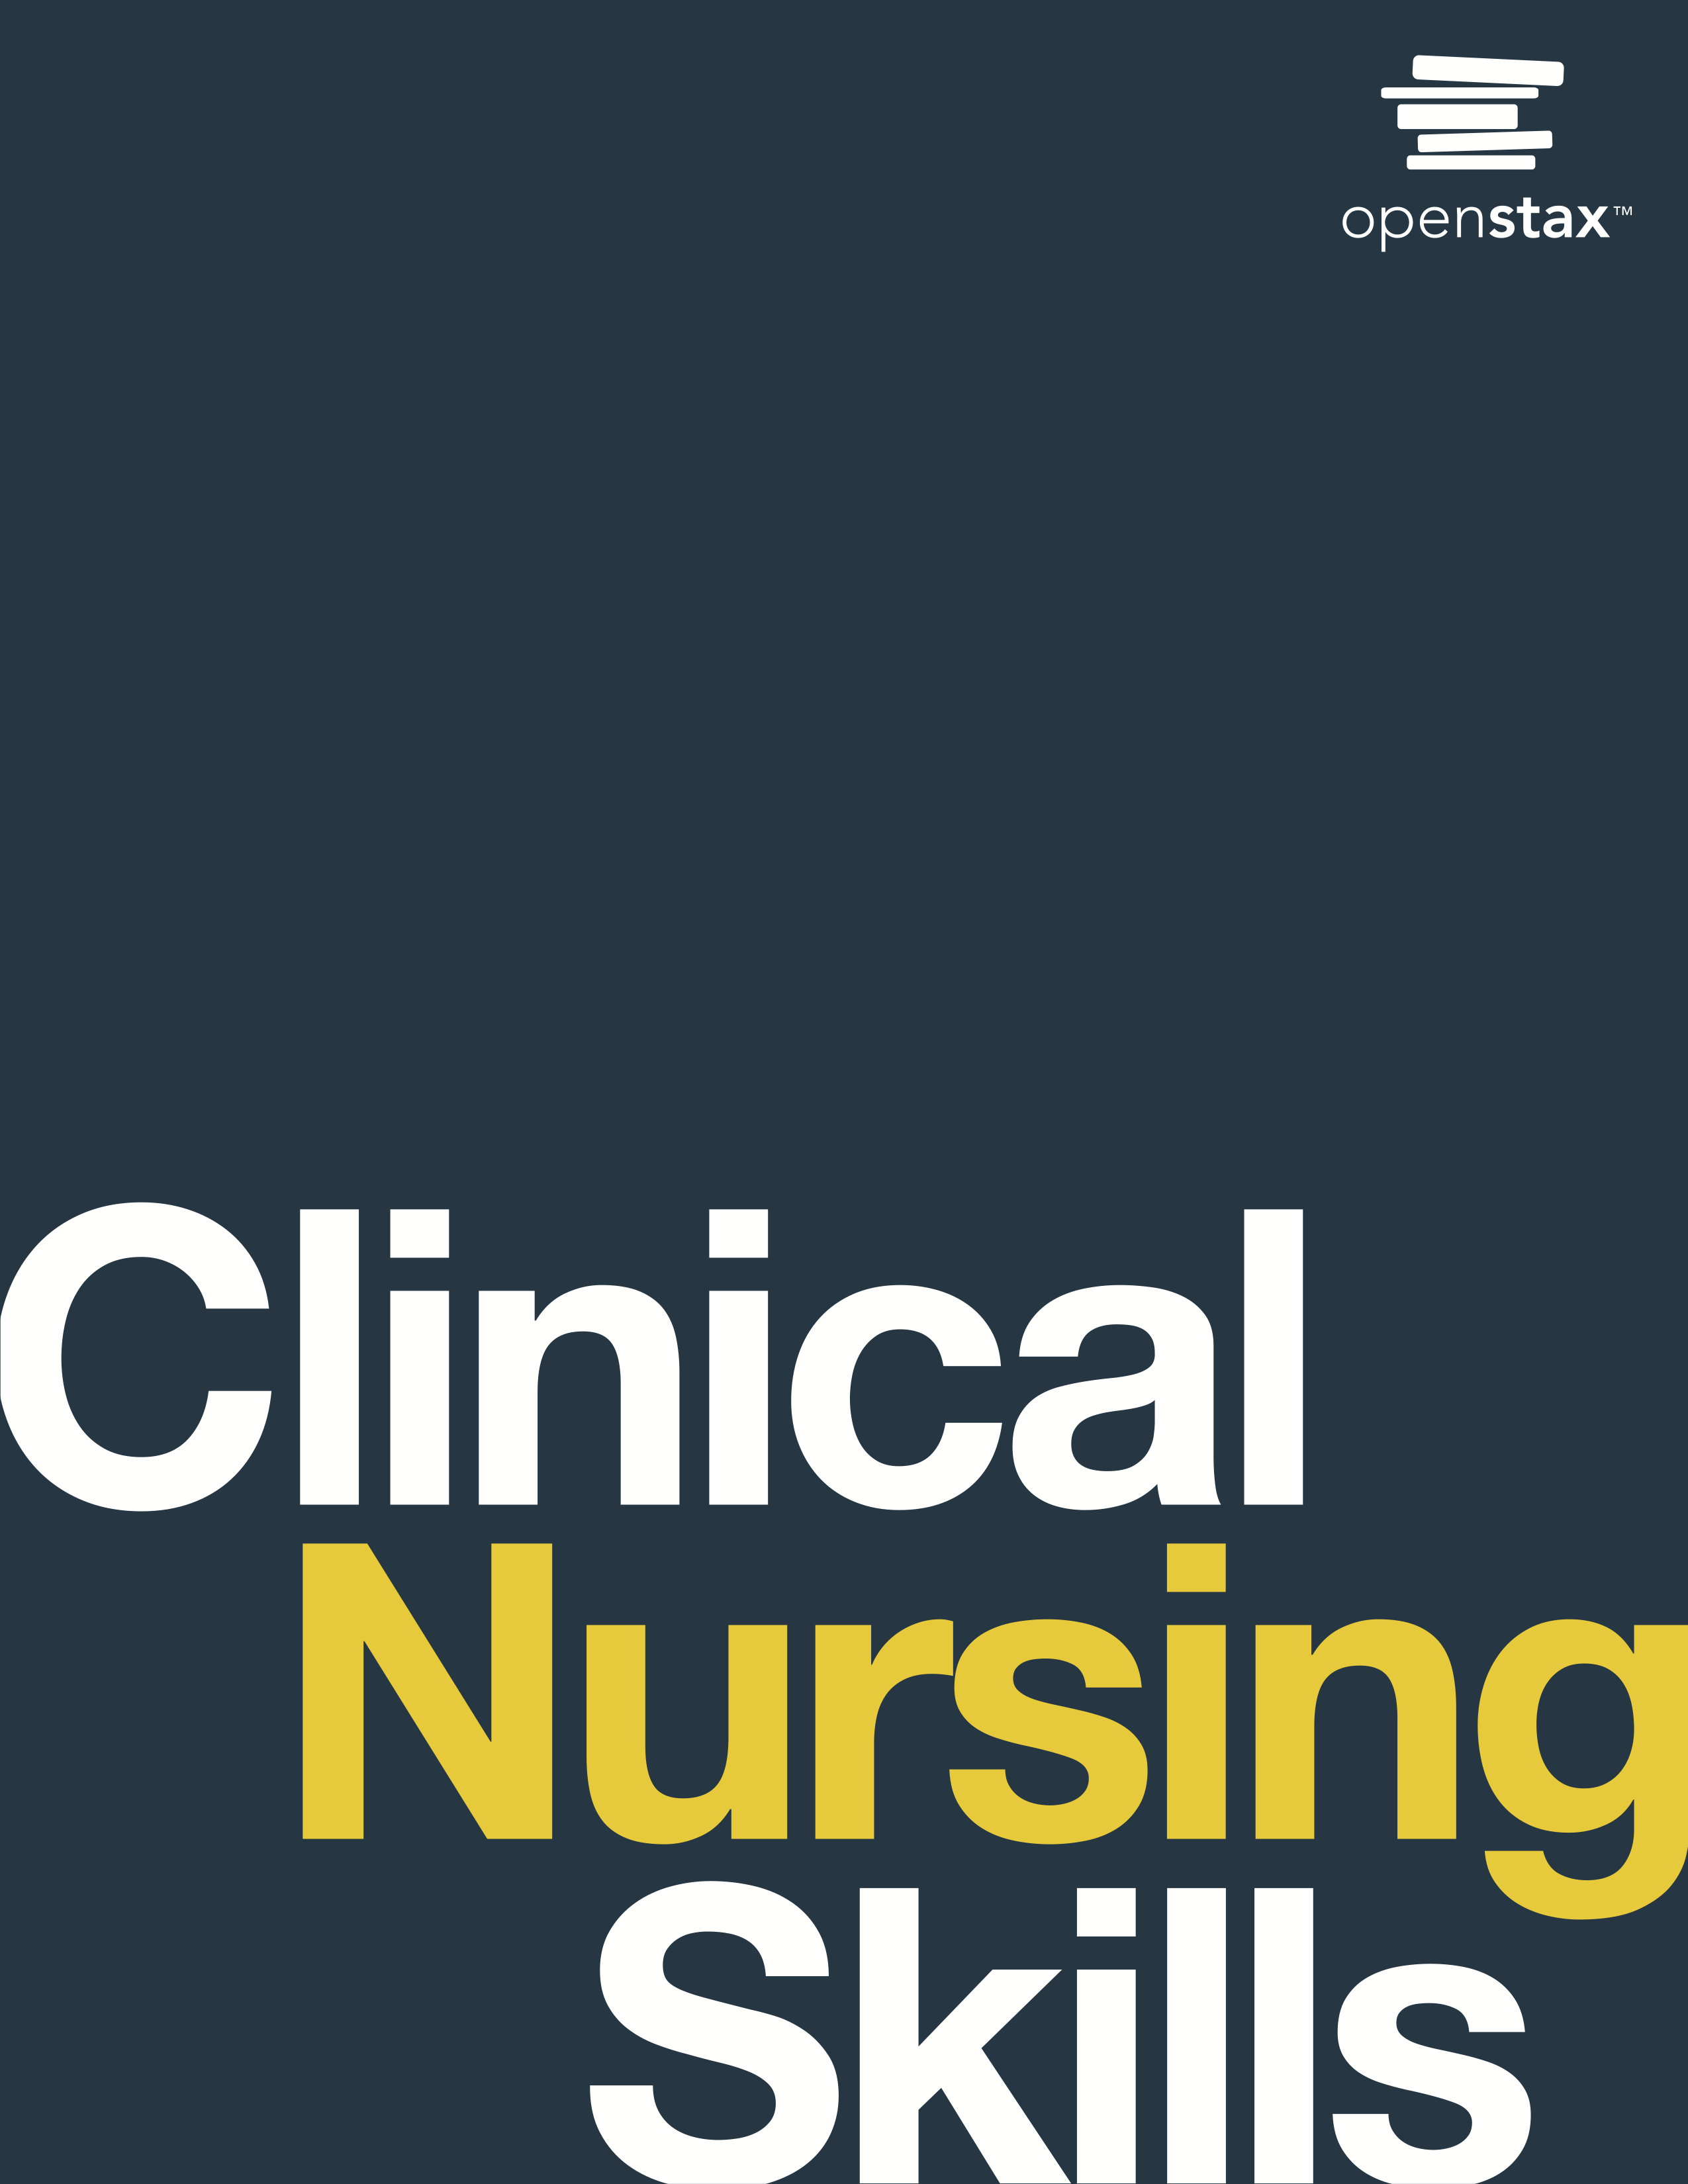 OpenStax Textbook Cover: White and yellow text on navy blue background. Text: Clinical Nursing Skills